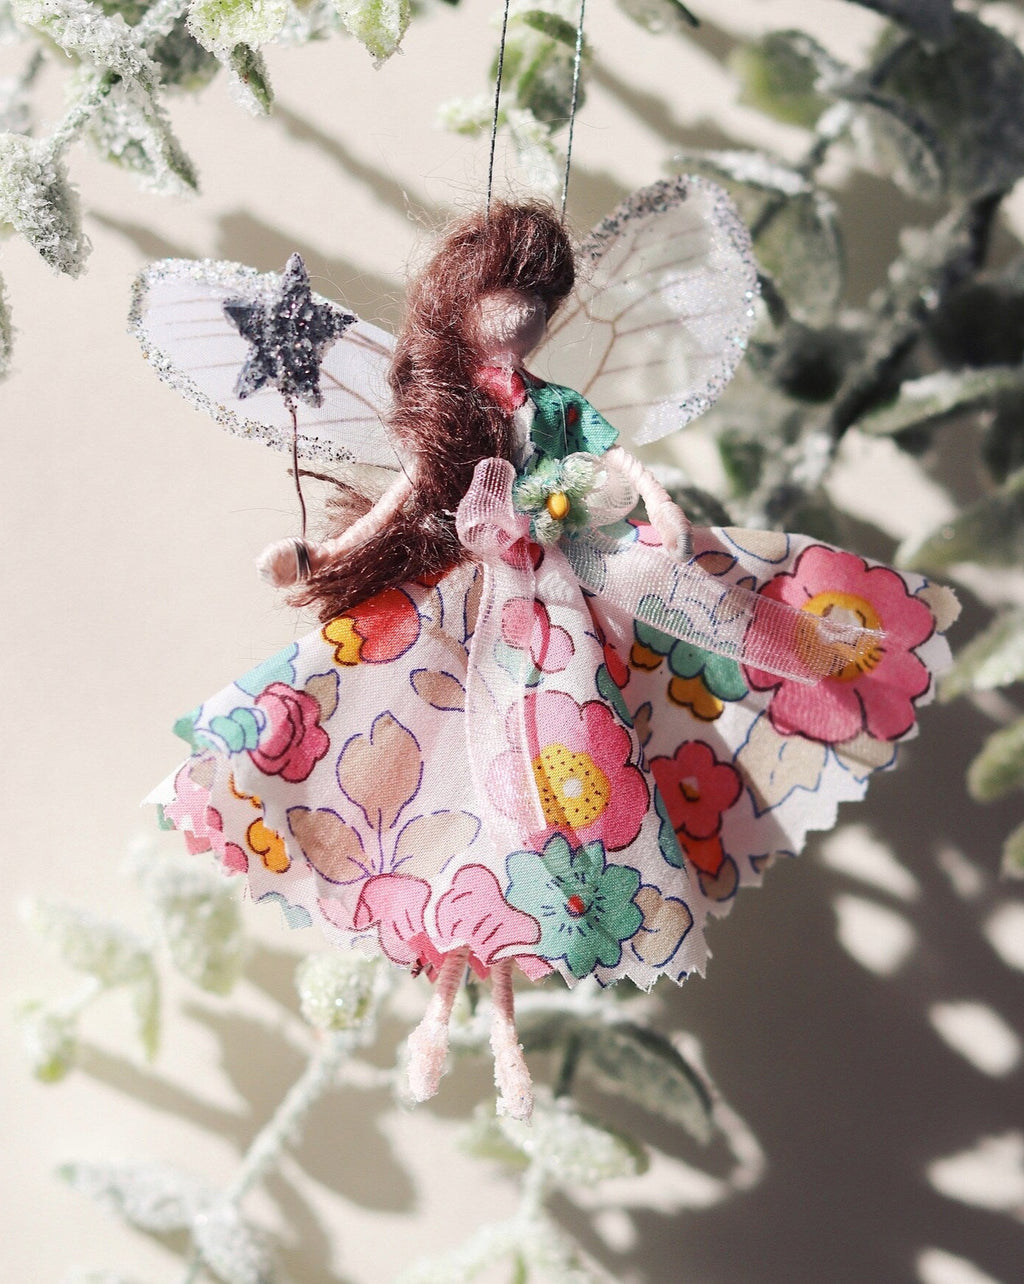 This little fairy is dressed in a Liberty print fabric. She has sashed her gown at the waist with a ivory Organza ribbon and a little rose trim. Her little shoes are dipped in glitter. She has delicate wings made from silk Organza and of course, her glittered wand that brings you magic!